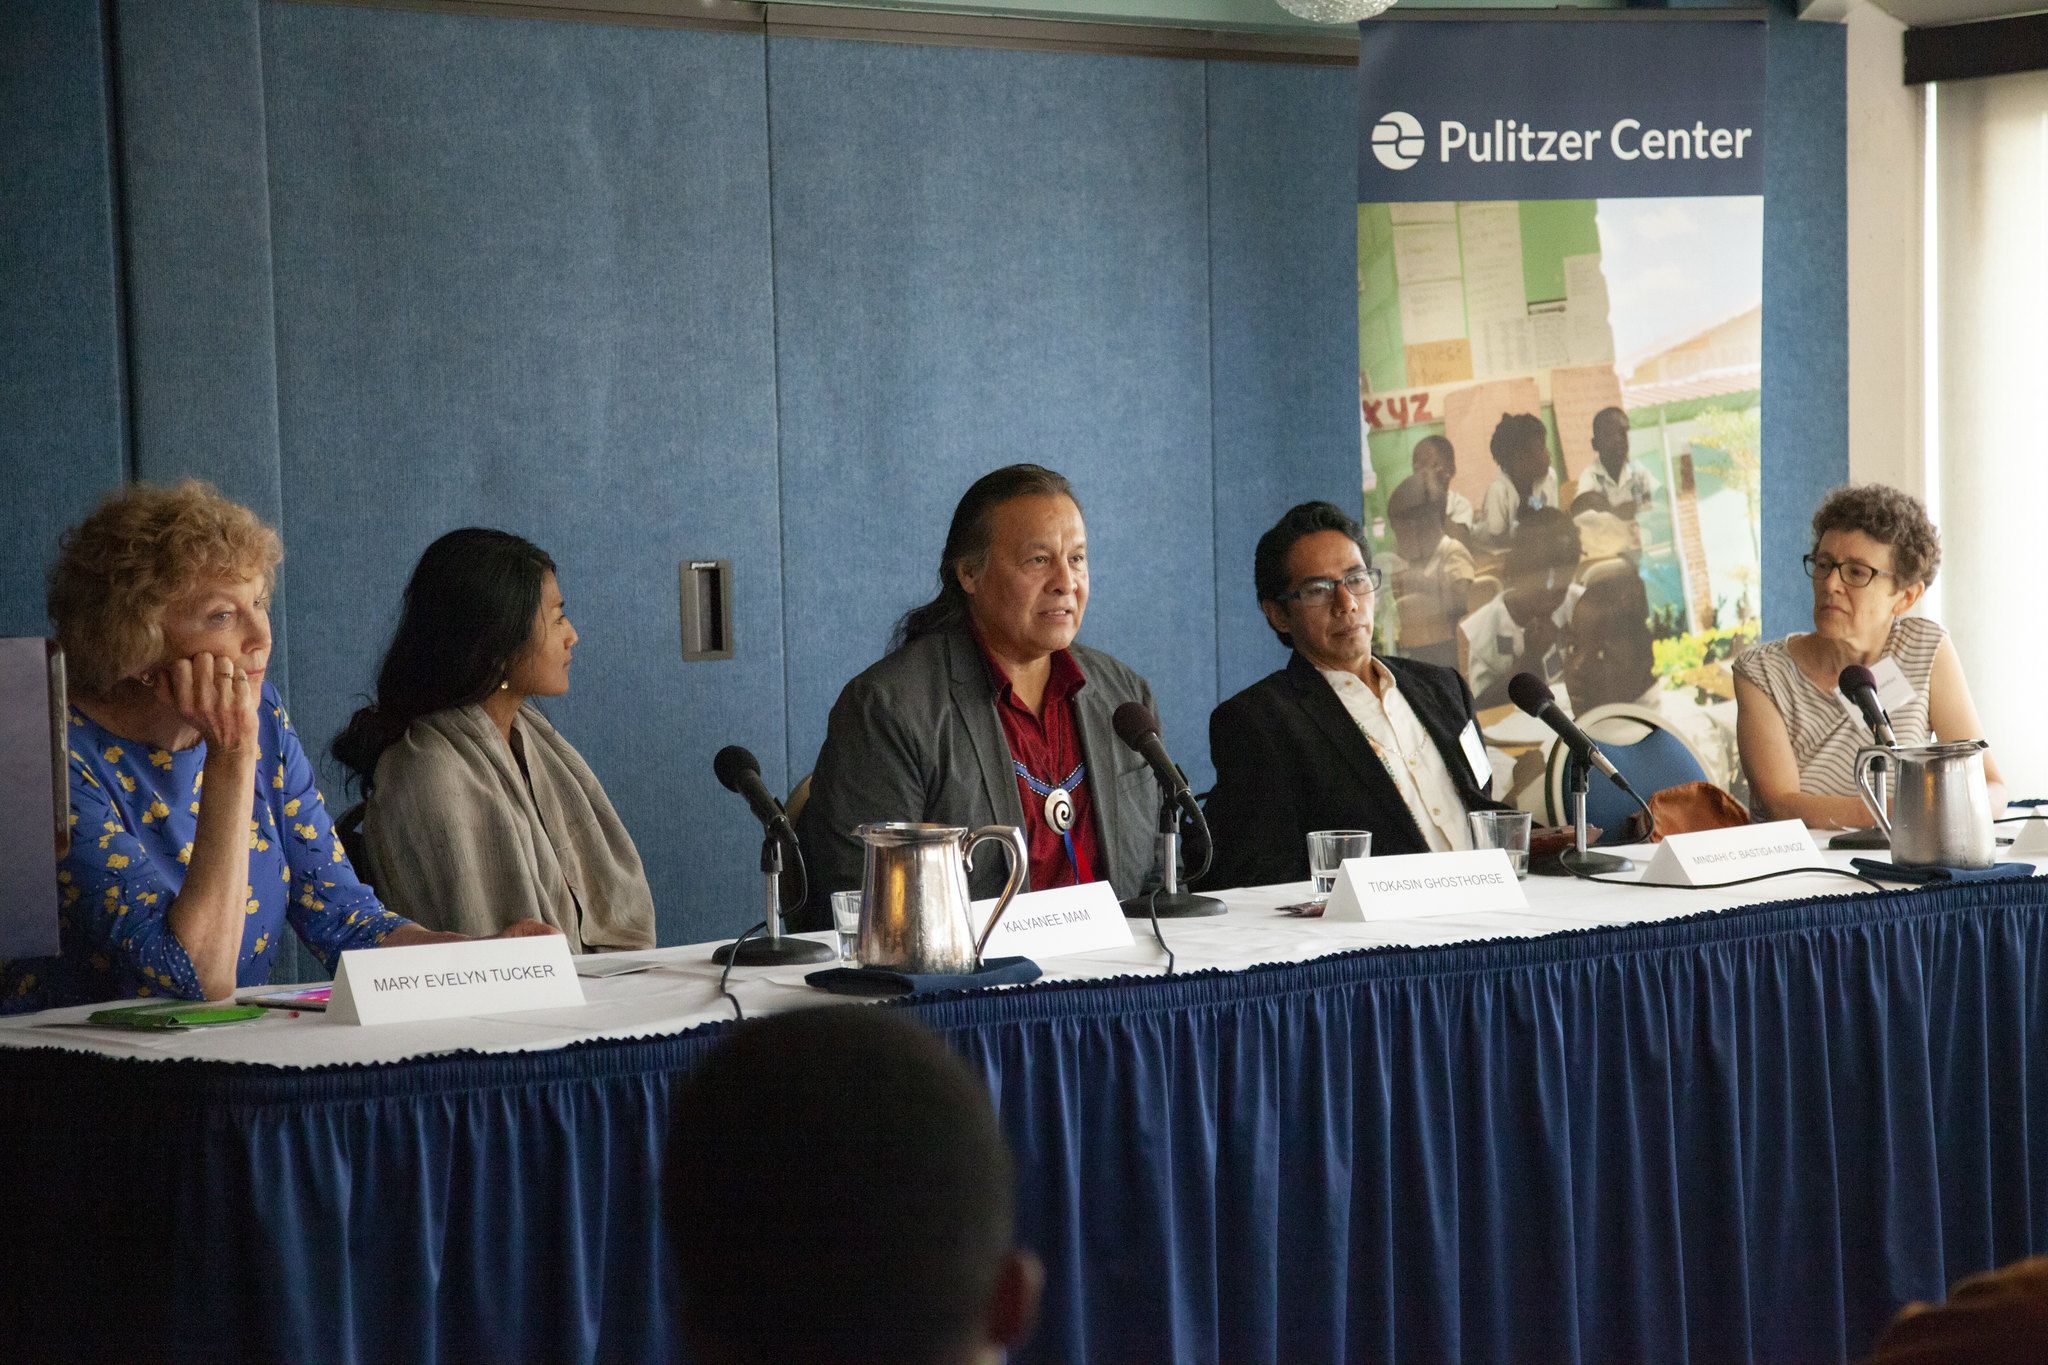 Tiokasin Ghosthorse speaks on the importance of language during the panel for Religion & the Environment at the Beyond Religion Conference. Also present: (from left) Mary Evelyn Tucker, Kalyanee Mam, Mindahi C. Bastida Munoz, and Marianne Comfort. Image by Jin Ding. Washington, D.C., 2019.